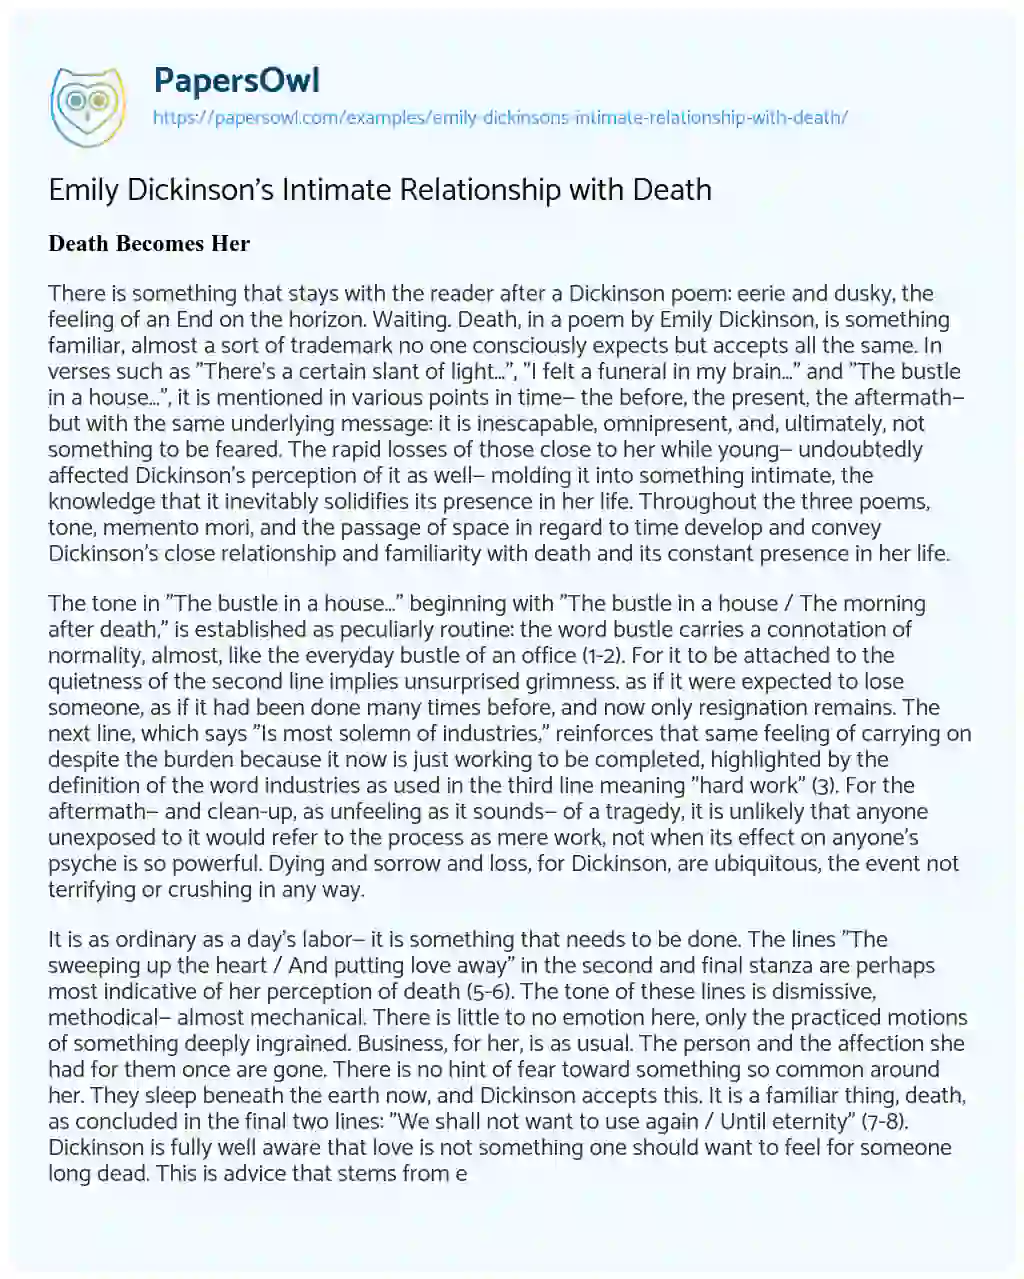 Essay on Emily Dickinson’s Intimate Relationship with Death